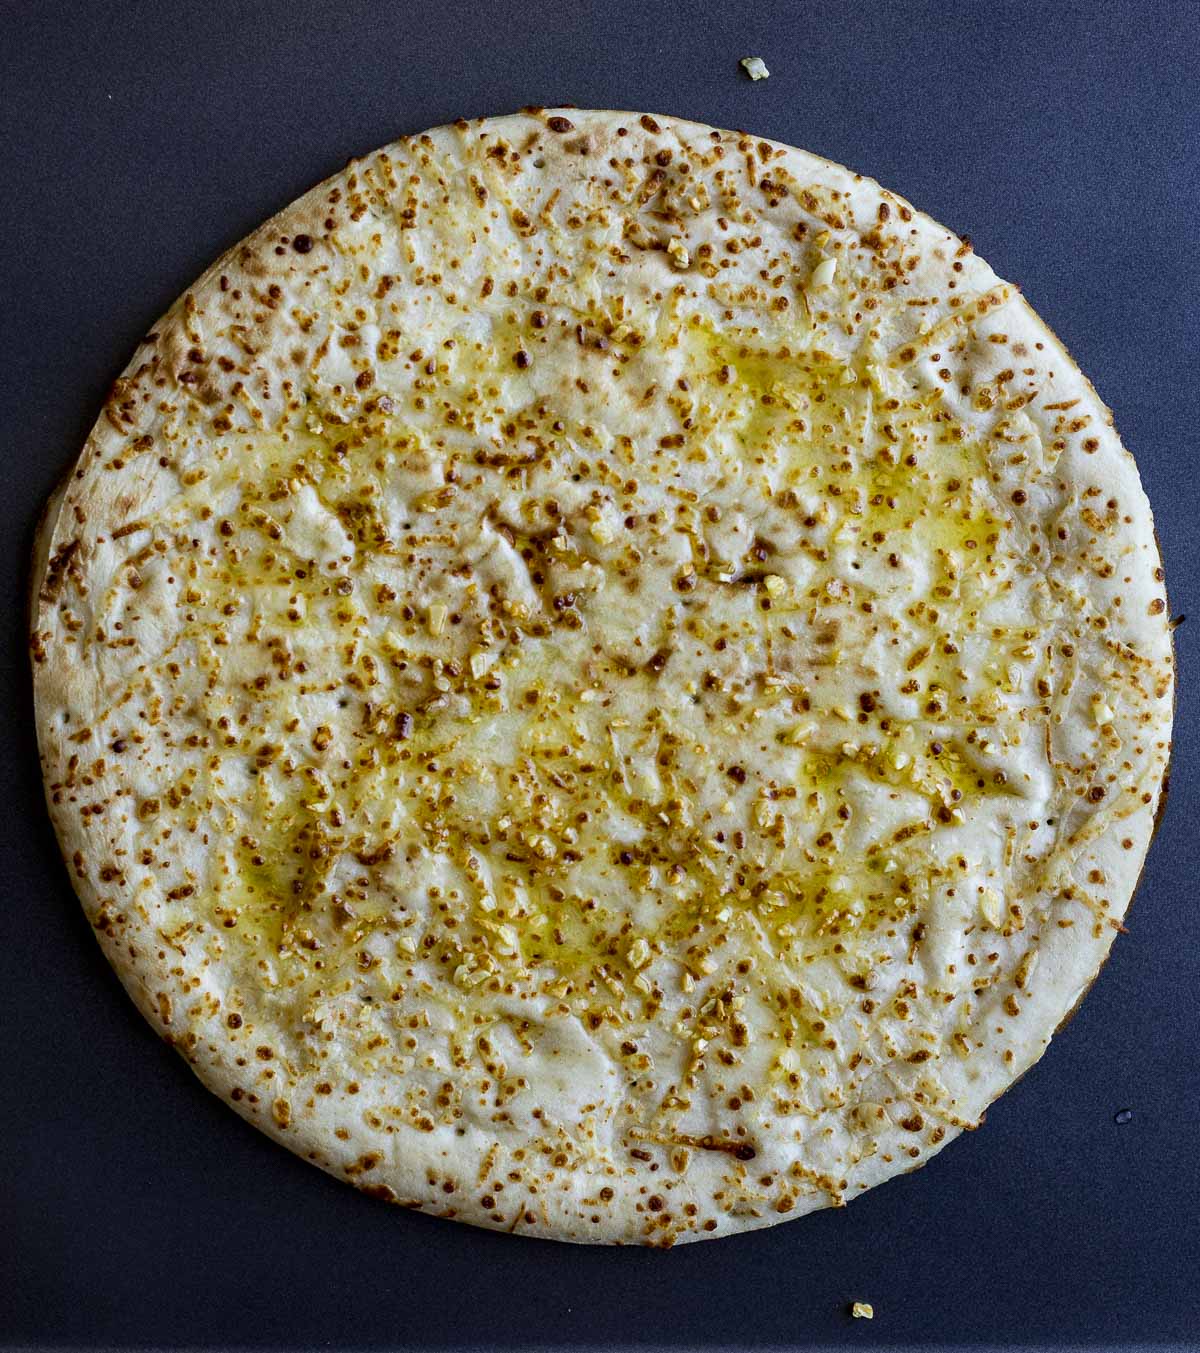 Pre-made pizza crust with garlic olive oil brushed on top.